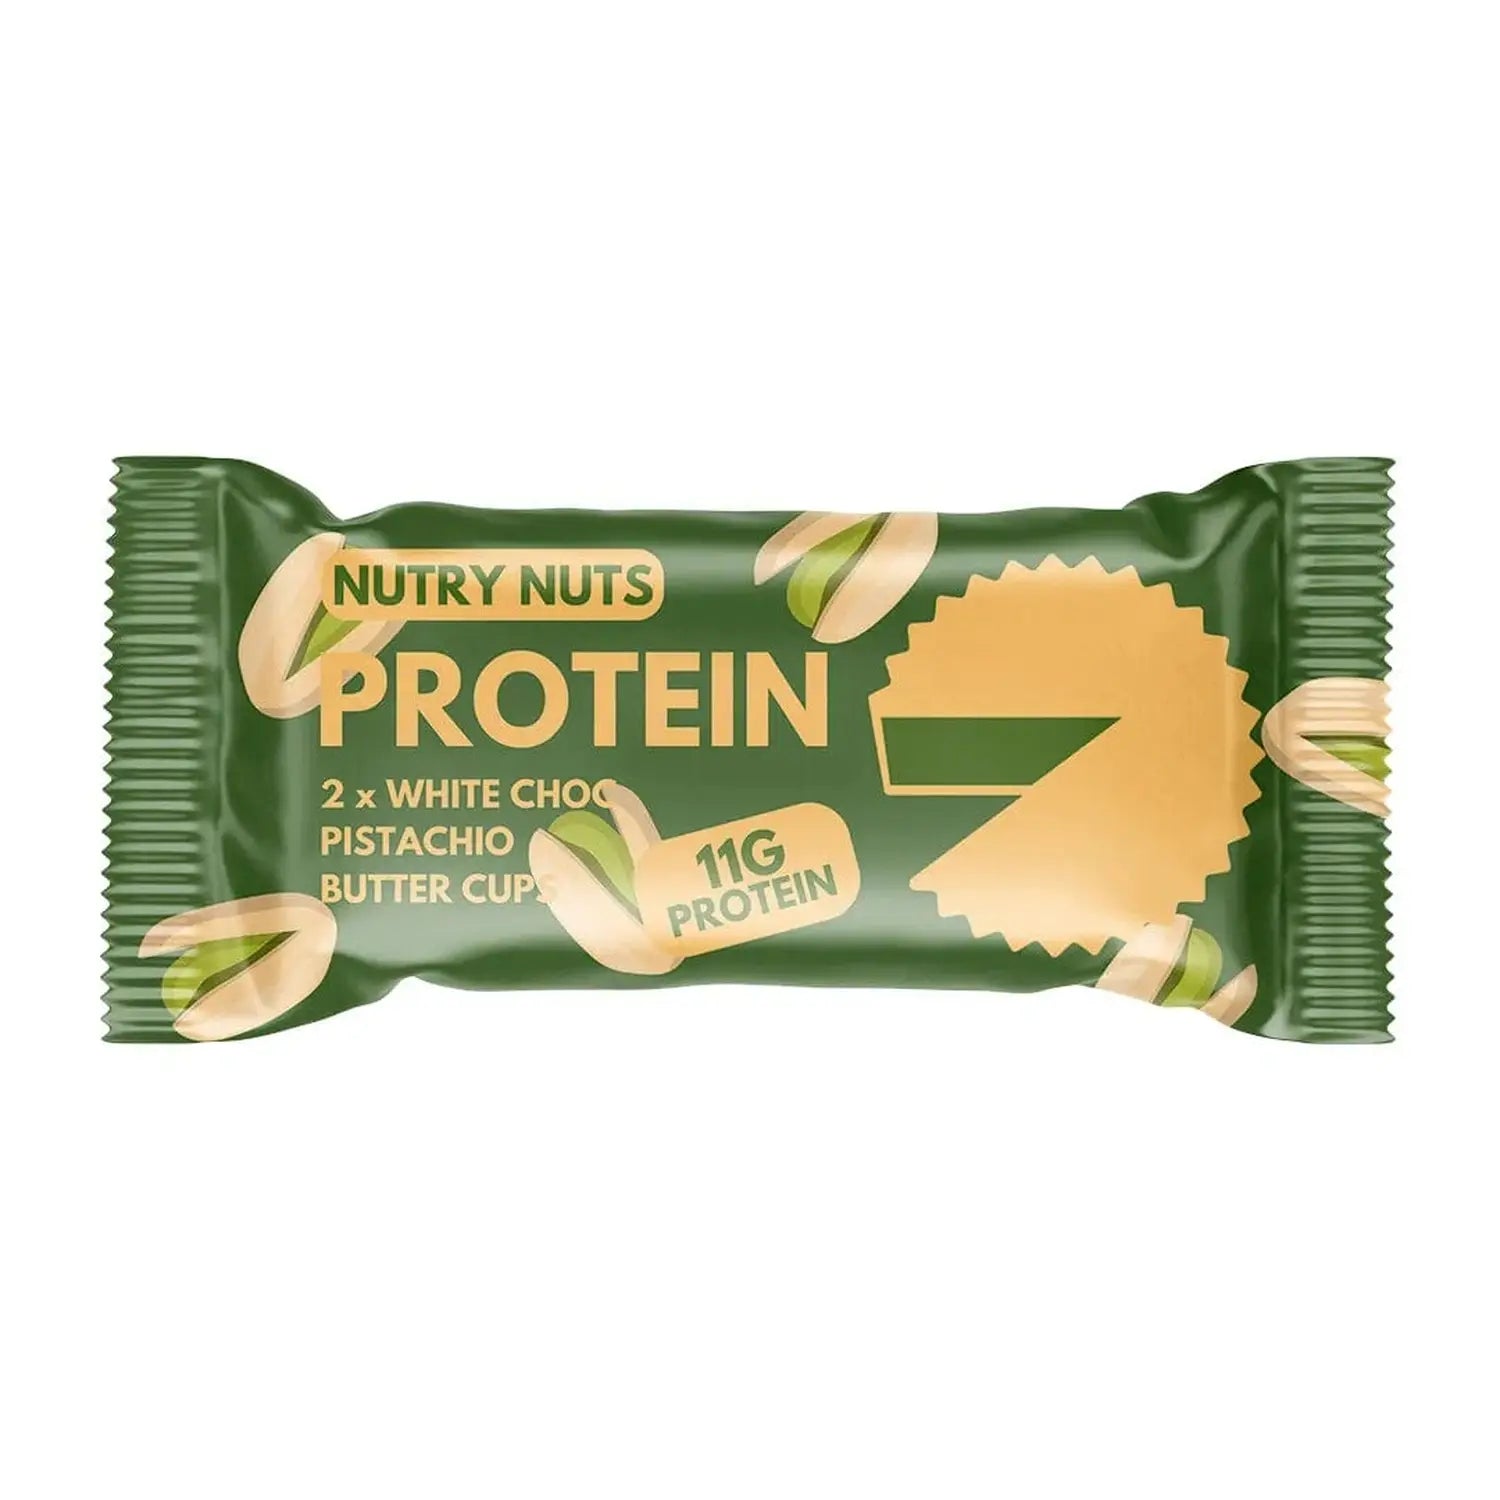 Nutry Nuts Nutry Nuts - Protein Peanut Butter Cups 42 g White Choc Pistachio kaufen bei HighPowered.ch